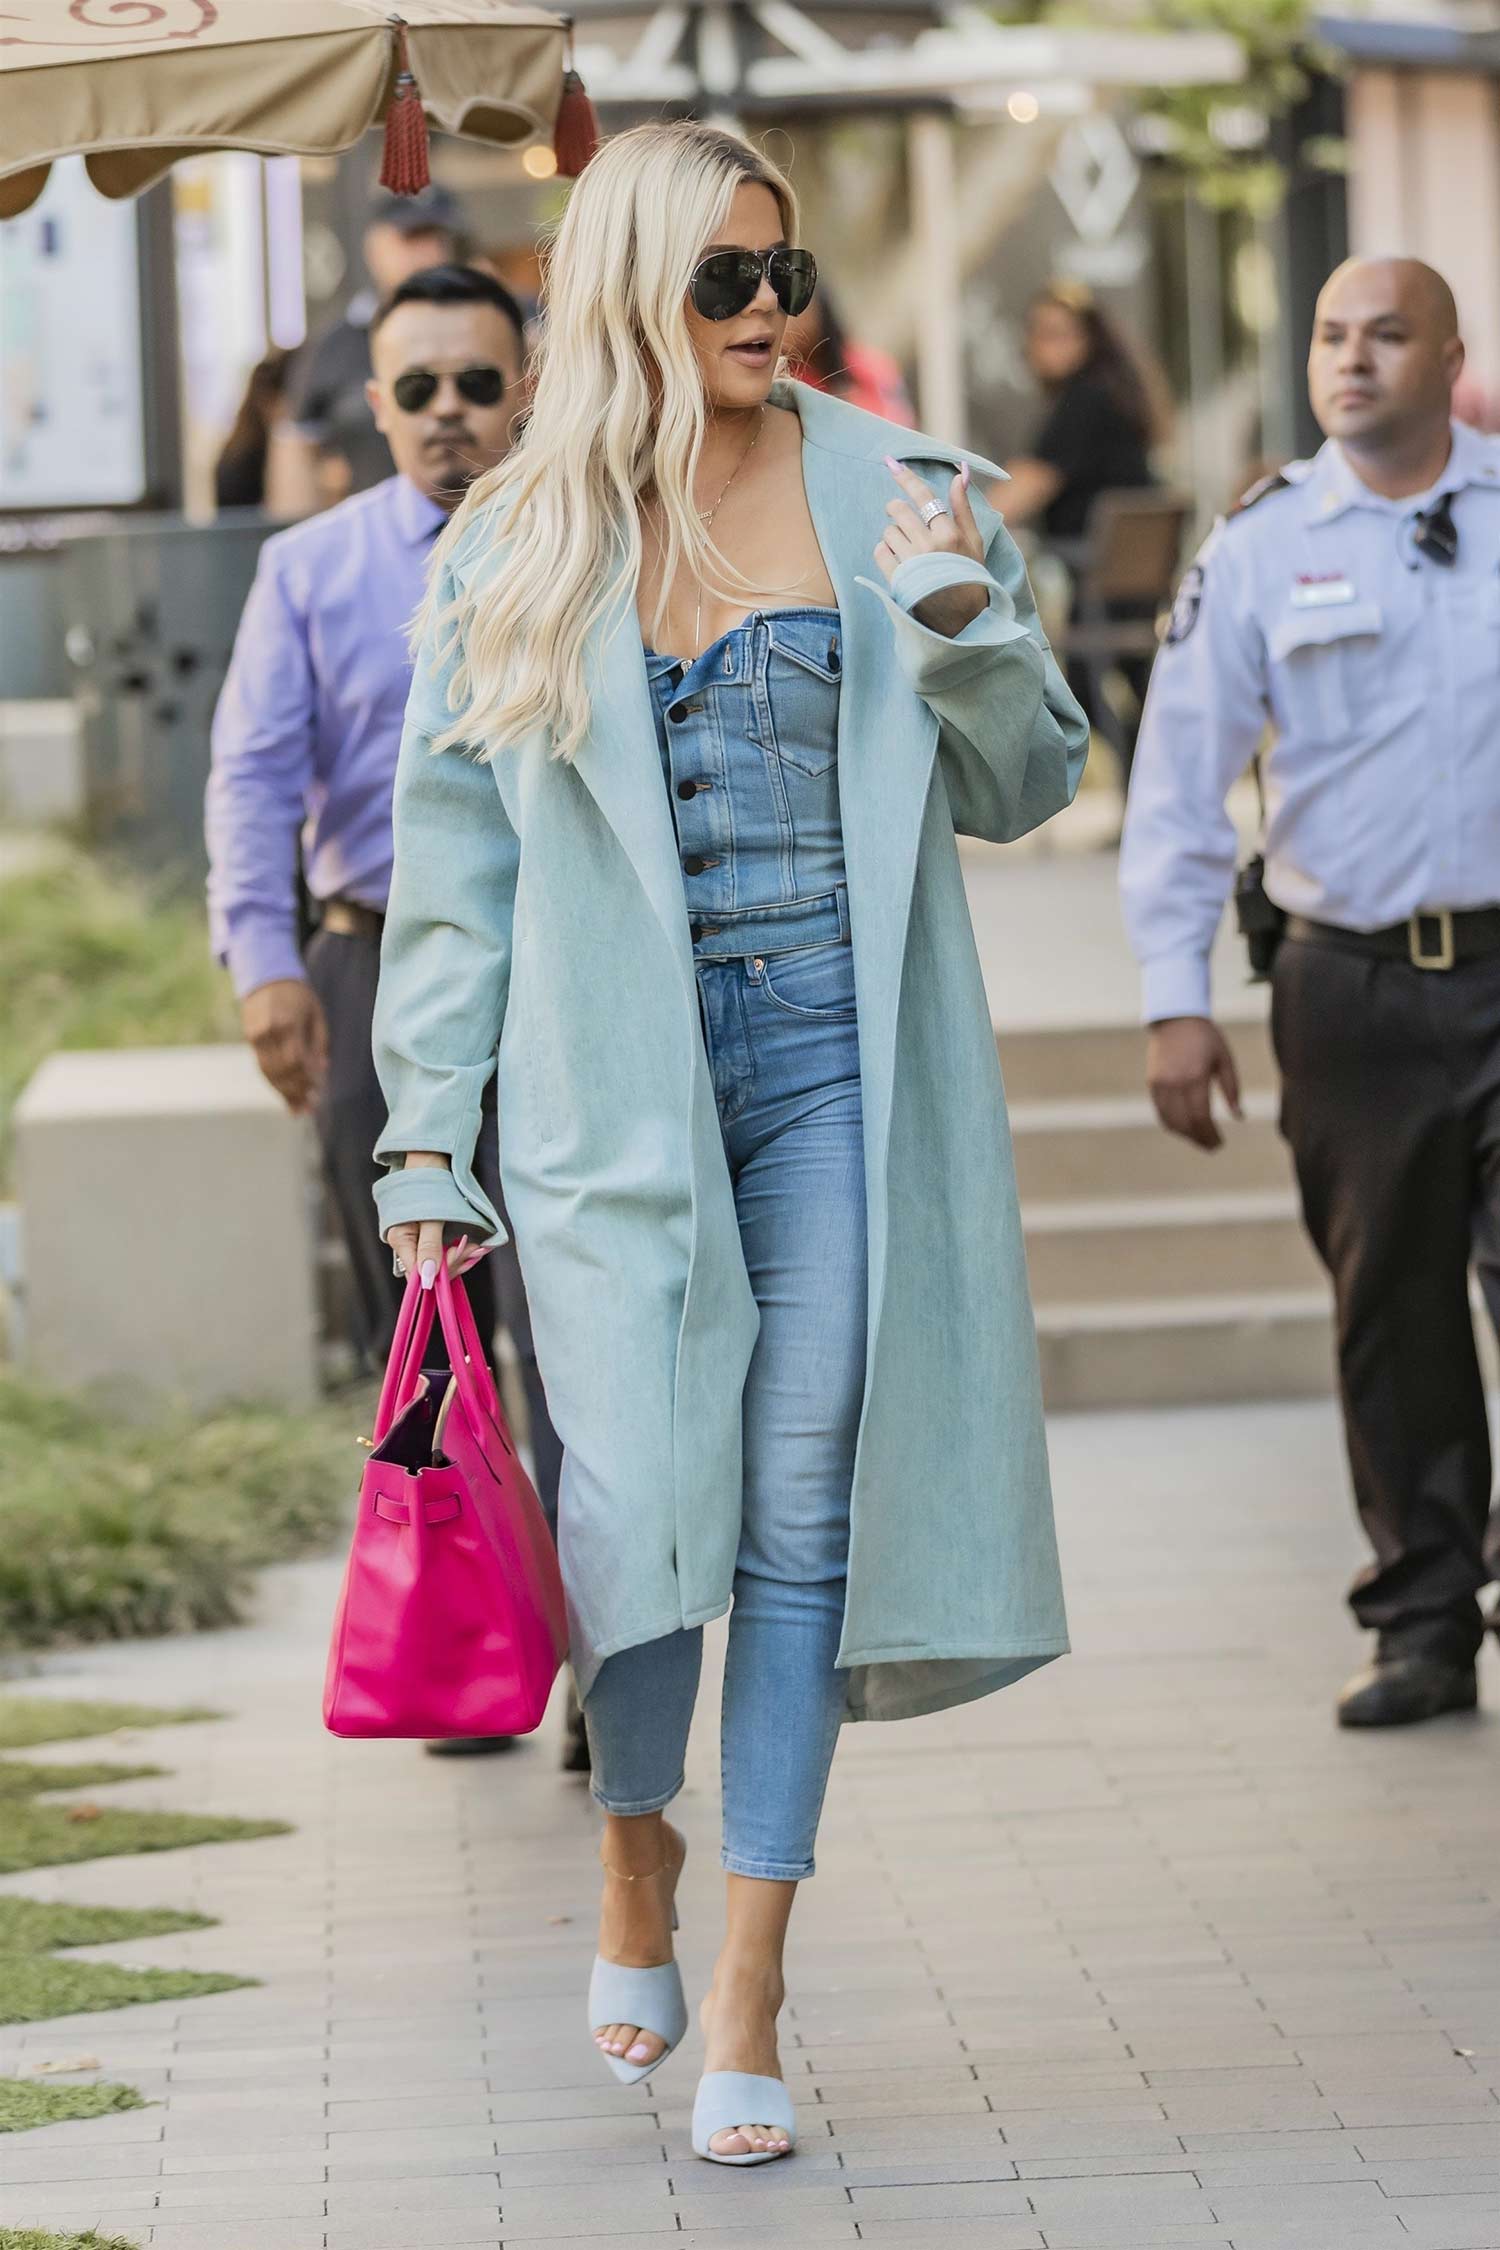 Khloe Kardashian goes BRALESS in jersey pantsuit after changing out of  skintight blue minidress on NYC trip | The US Sun